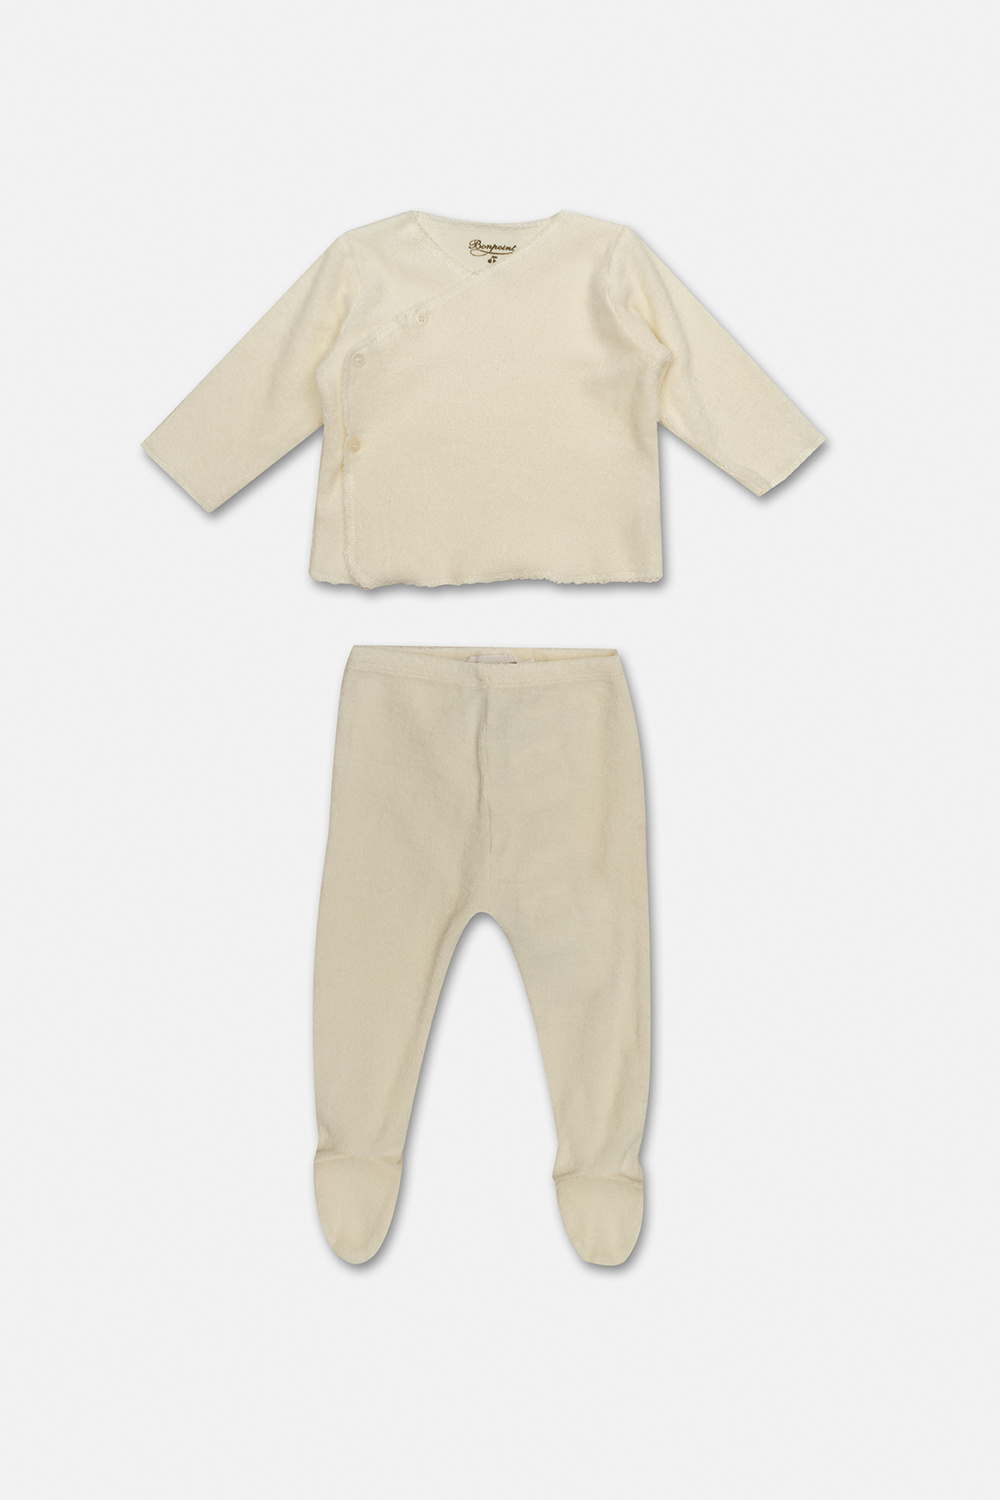 Bonpoint  Baby top and trousers Performance set